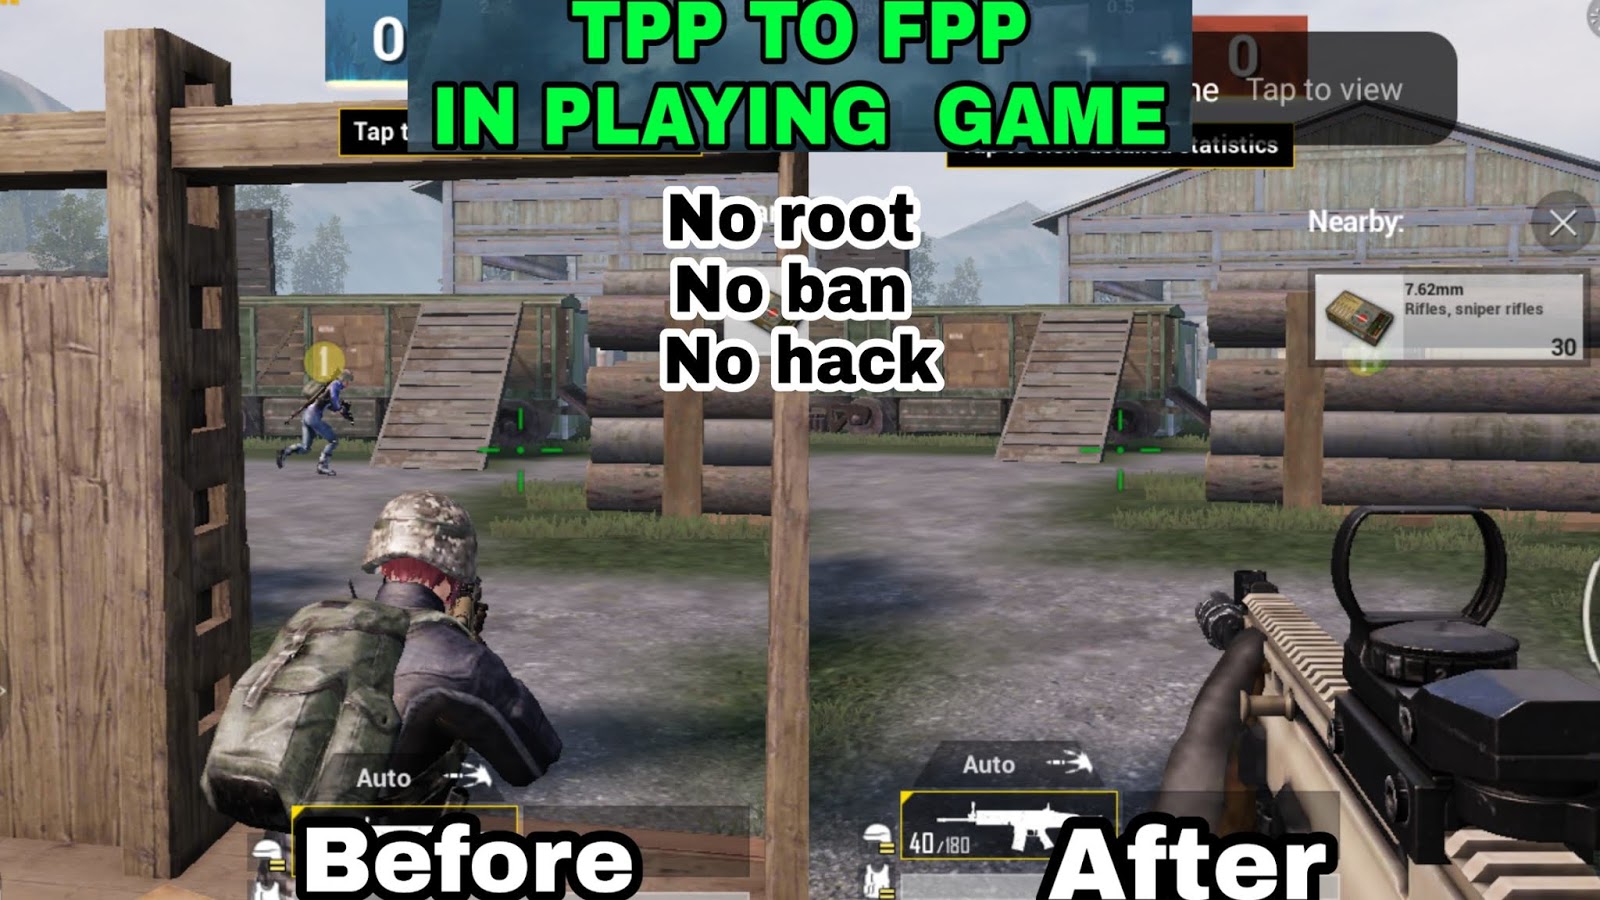 Mr Hacker Baba Tpp To Fpp In Plying Pubg Mobile